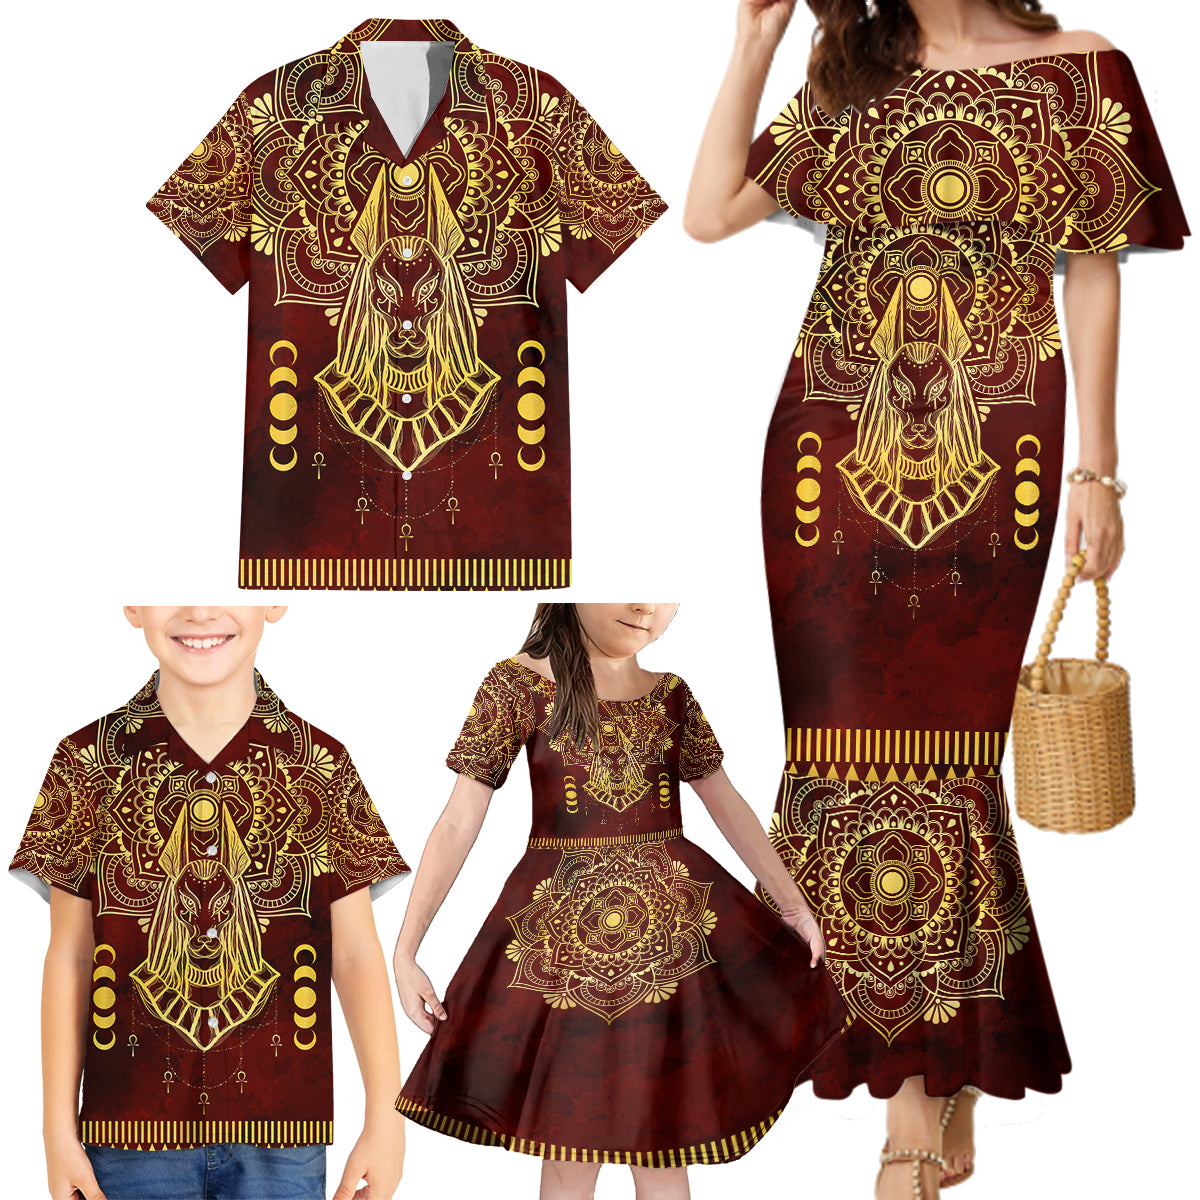 Personalized Anubis Family Matching Mermaid Dress and Hawaiian Shirt Ancient Egyptian Pattern In Red